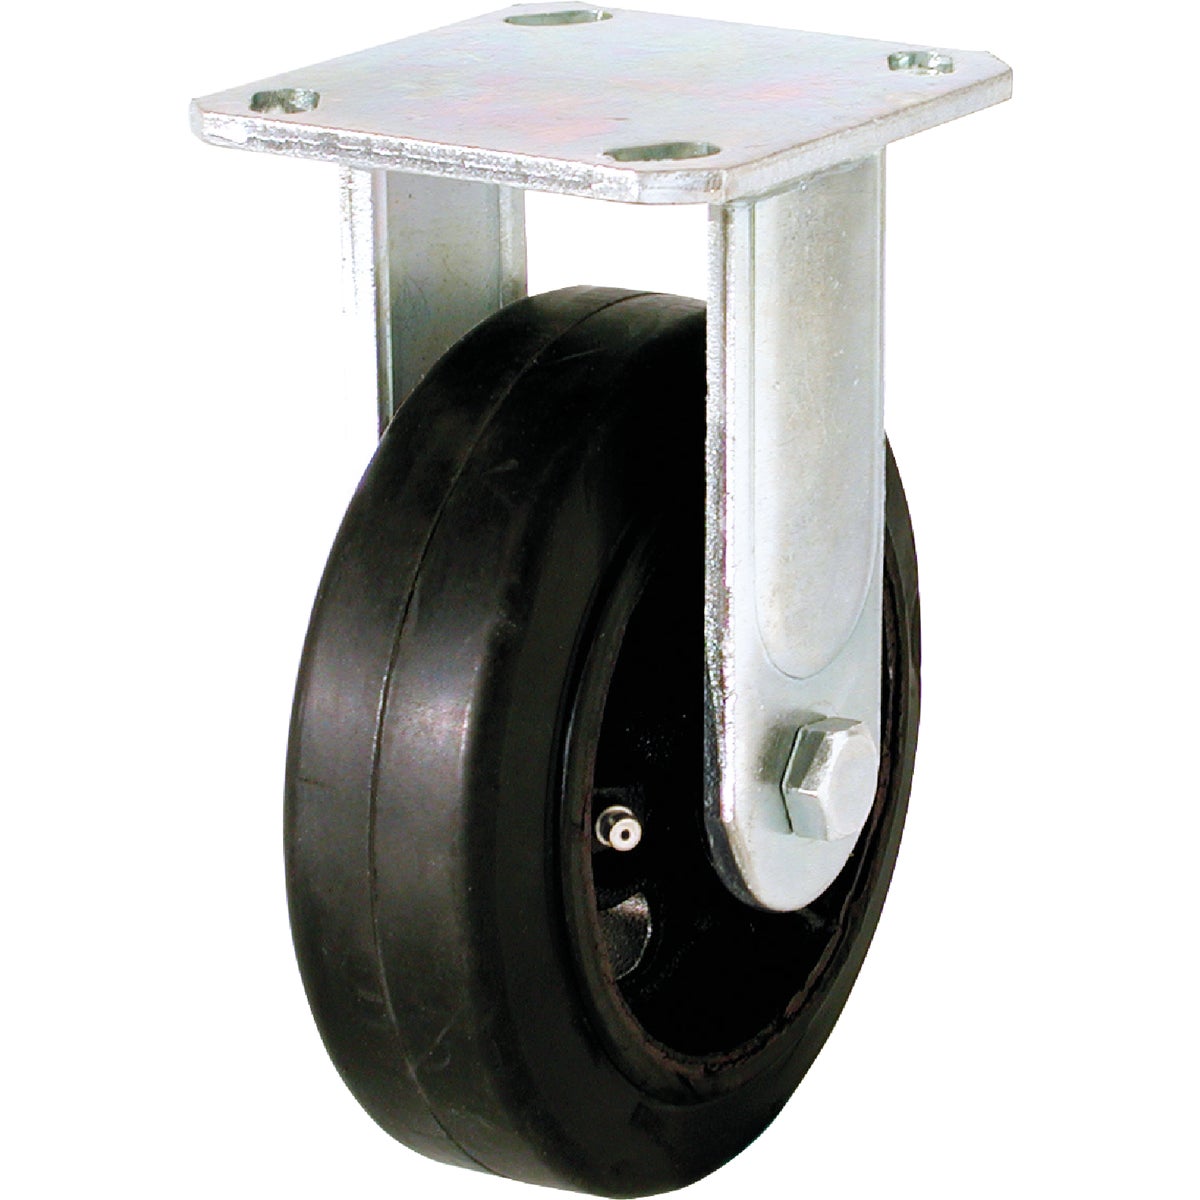 Item 200058, Mold-on rigid rubber casters have a cushioned rubber tread bonded to a cast